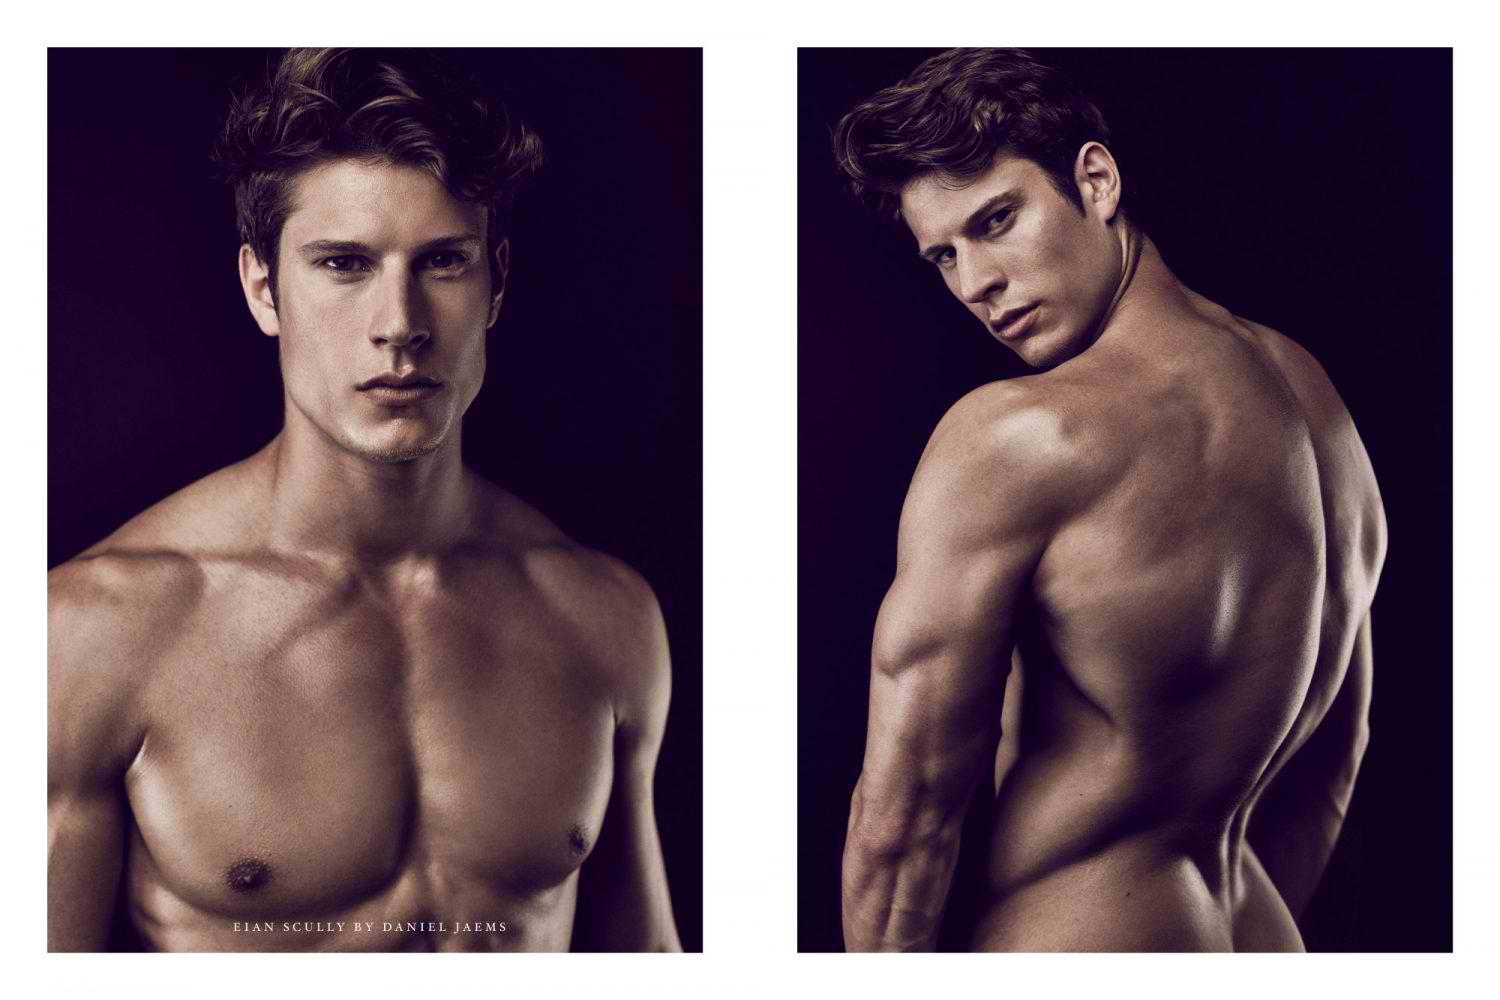 Eian-Scully-by-Daniel-Jaems-Obsession-No17-017-1500x1000